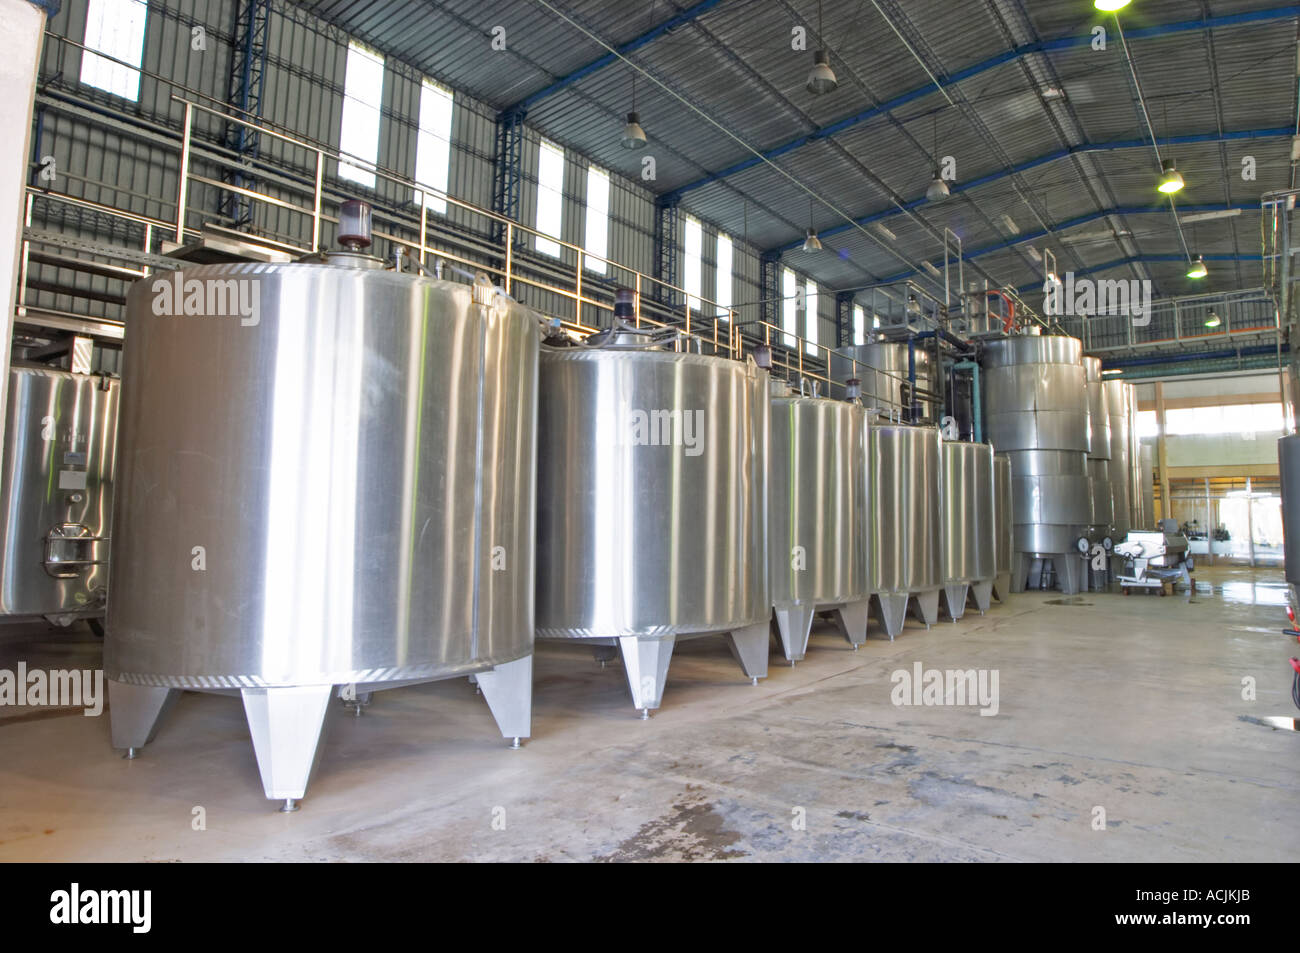 The vat hall with big stainless steel tanks for fermentation. Vinedos y Bodega Filgueira Winery, Cuchilla Verde, Canelones, Montevideo, Uruguay, South America Stock Photo